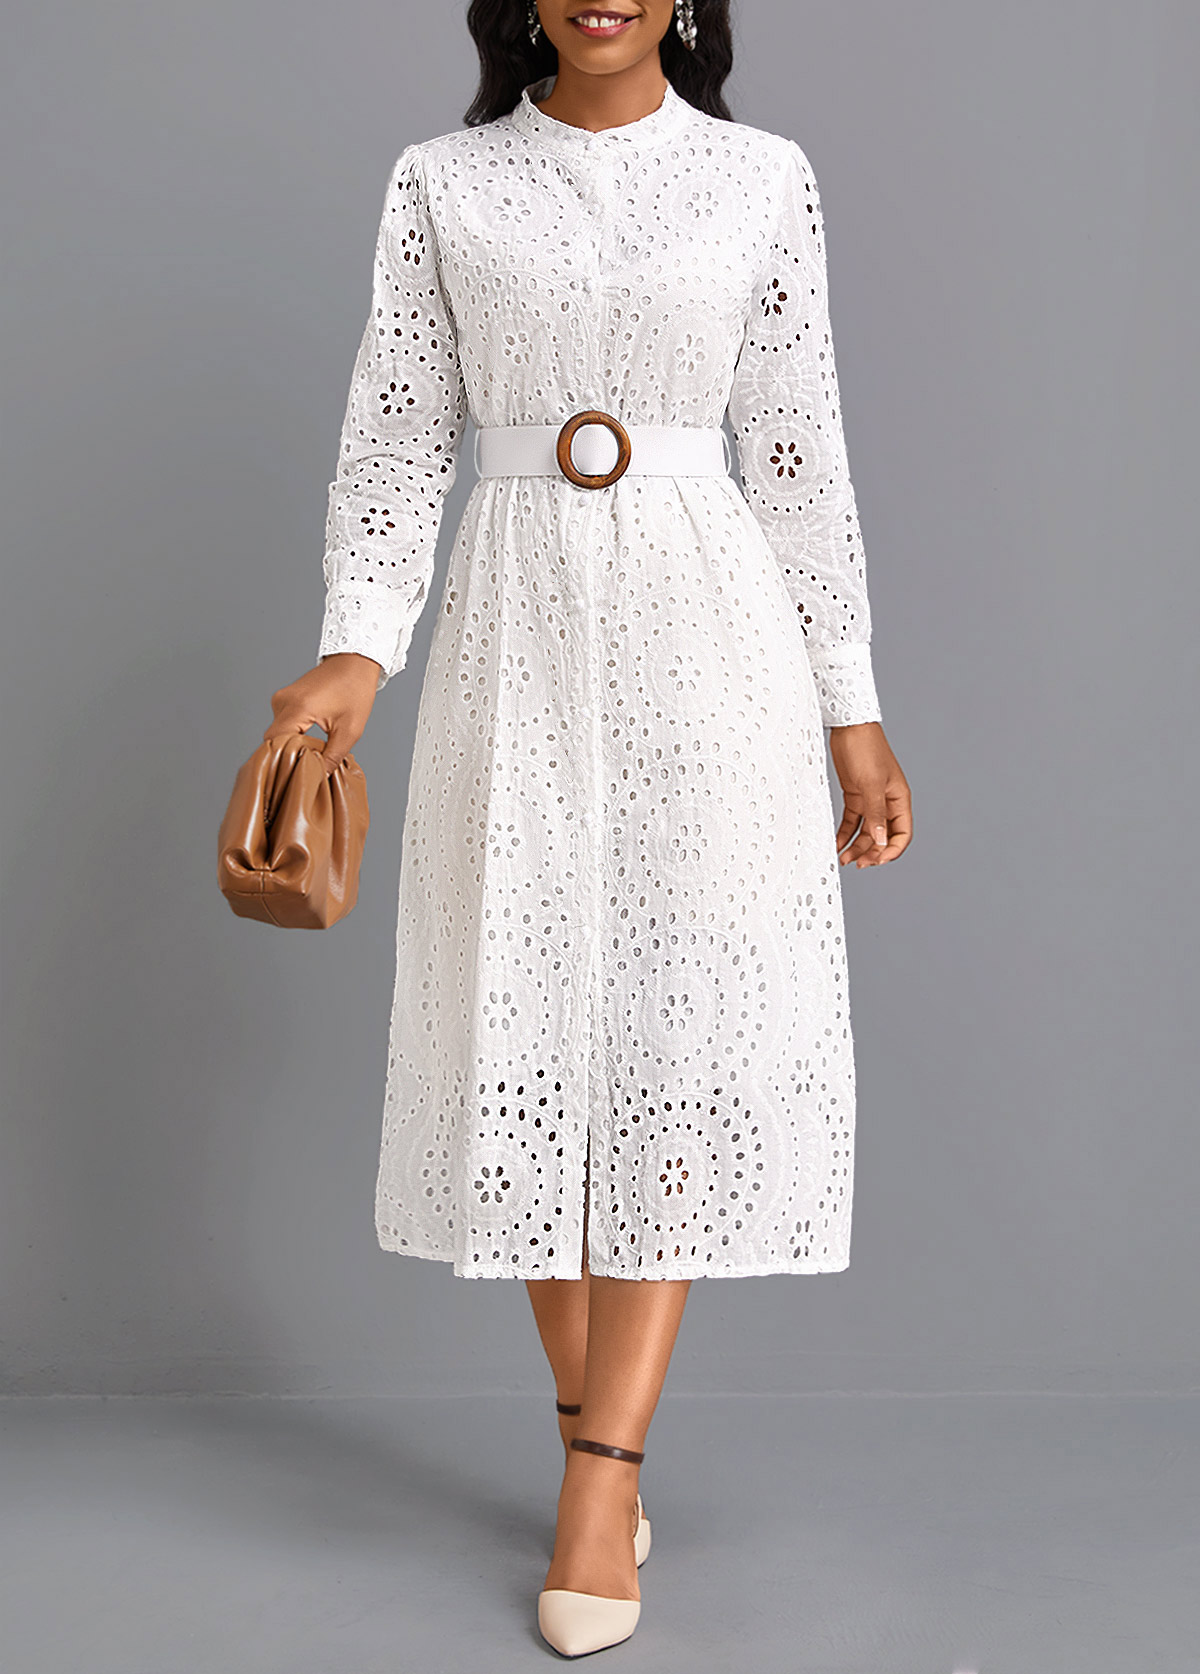 ROTITA Button White Belted Round Neck Long Sleeve Dress